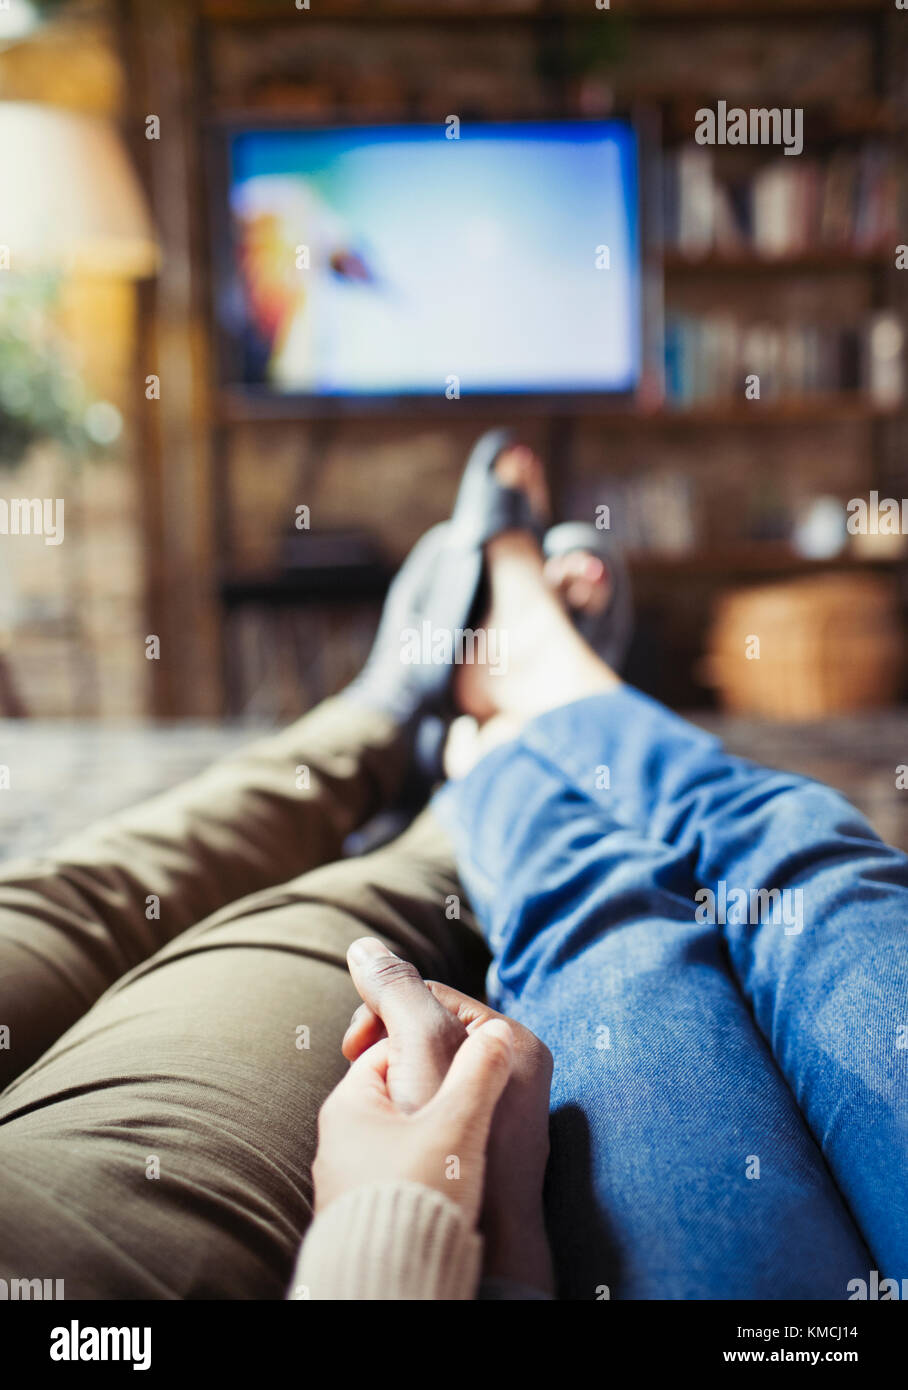 Personal perspective affectionate couple holding hands watching TV in living room Stock Photo